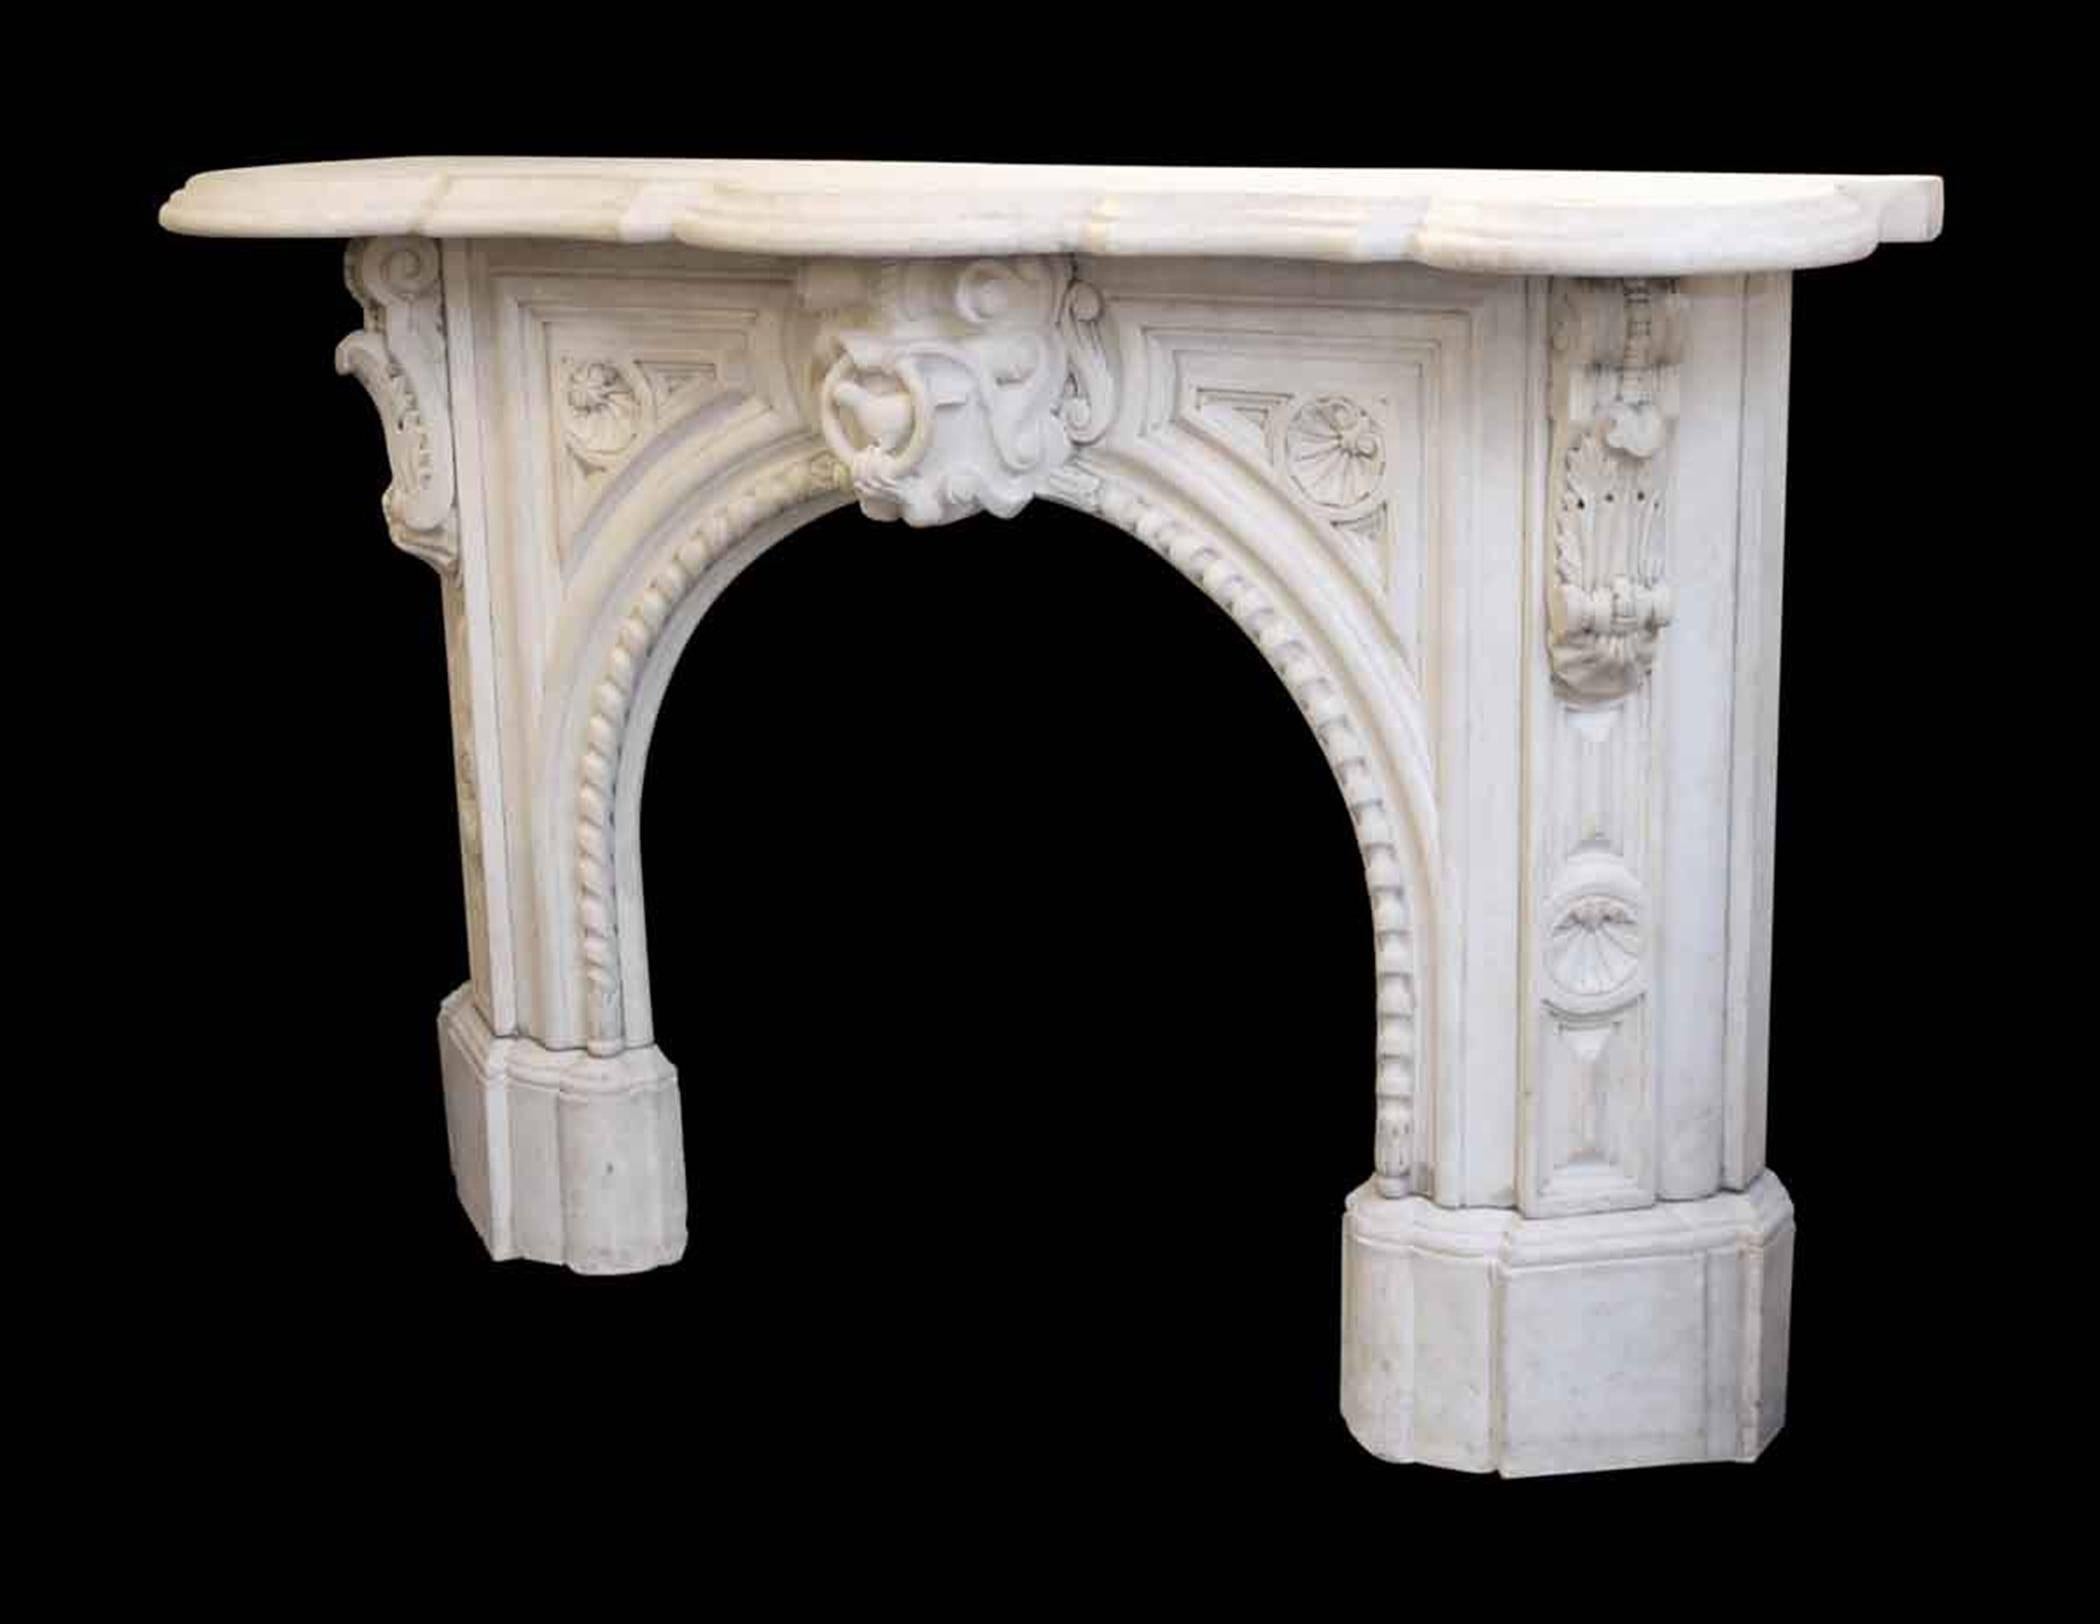 Victorian white statuary hand-carved arched marble mantel, circa 1838. Features a shell and bird motif with a beautiful beaded arched opening and leaf scrolled corbels. The detail on the bird's beak needs repair. This can be seen at our 5 East 16th